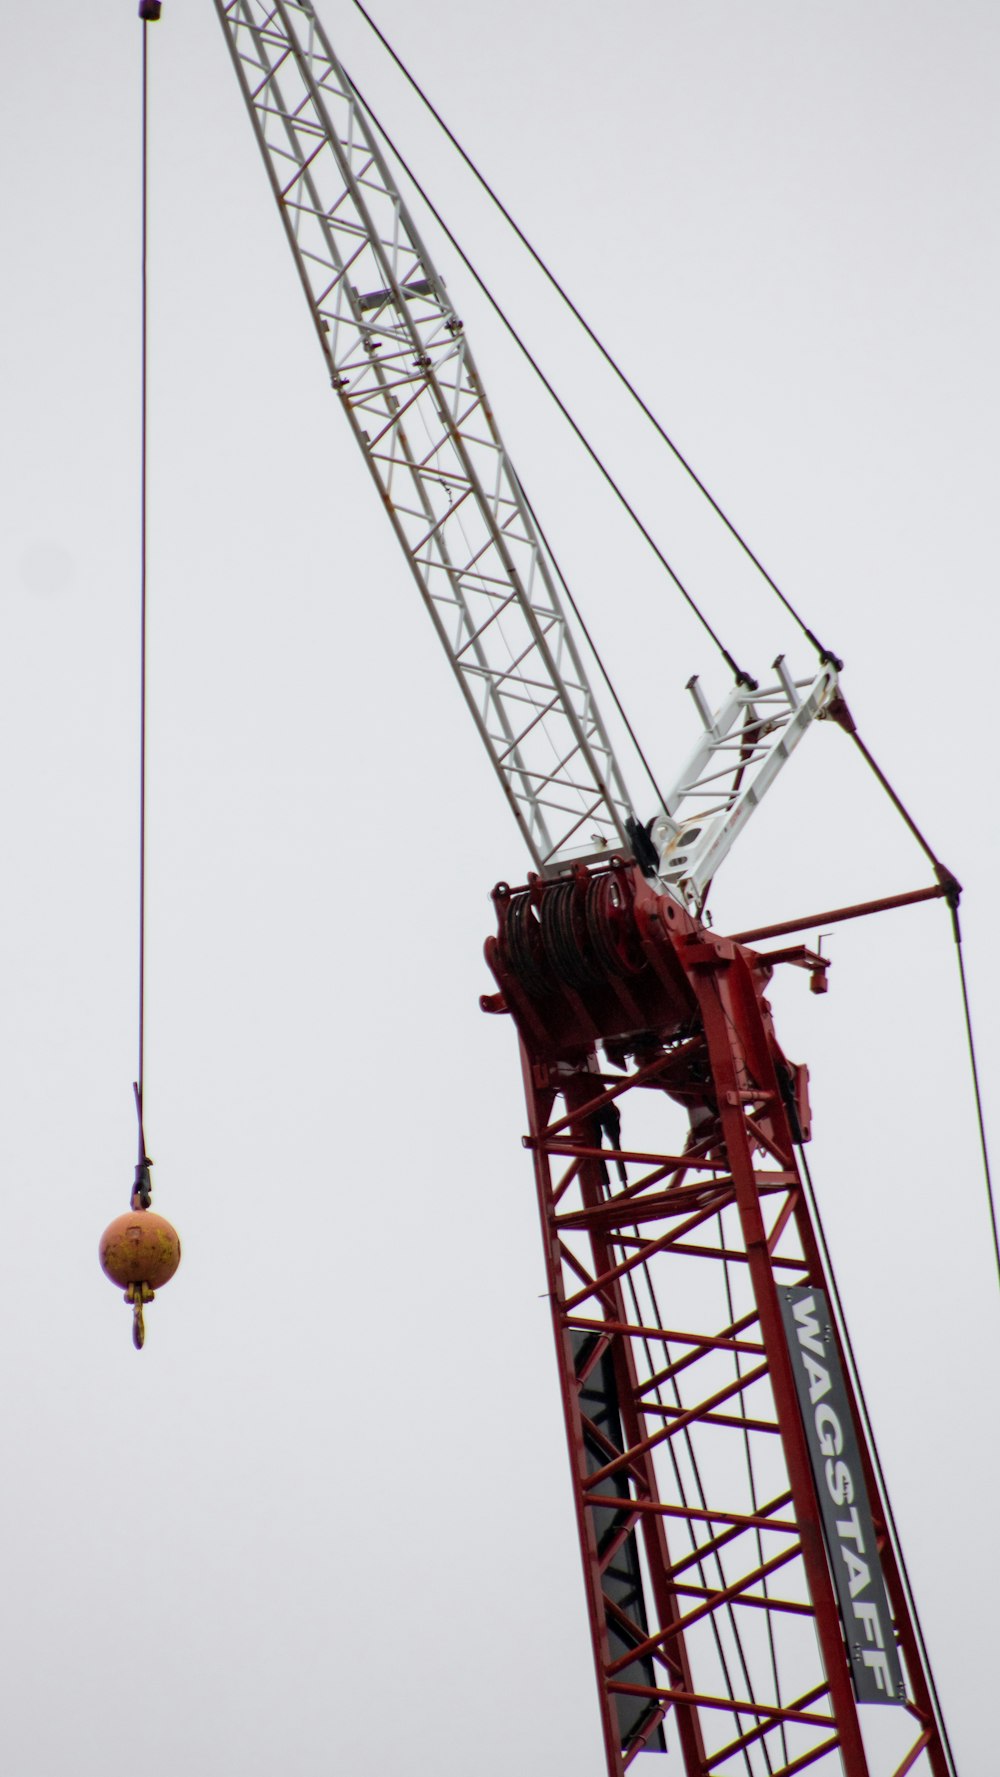 a crane is lifting a ball into the air